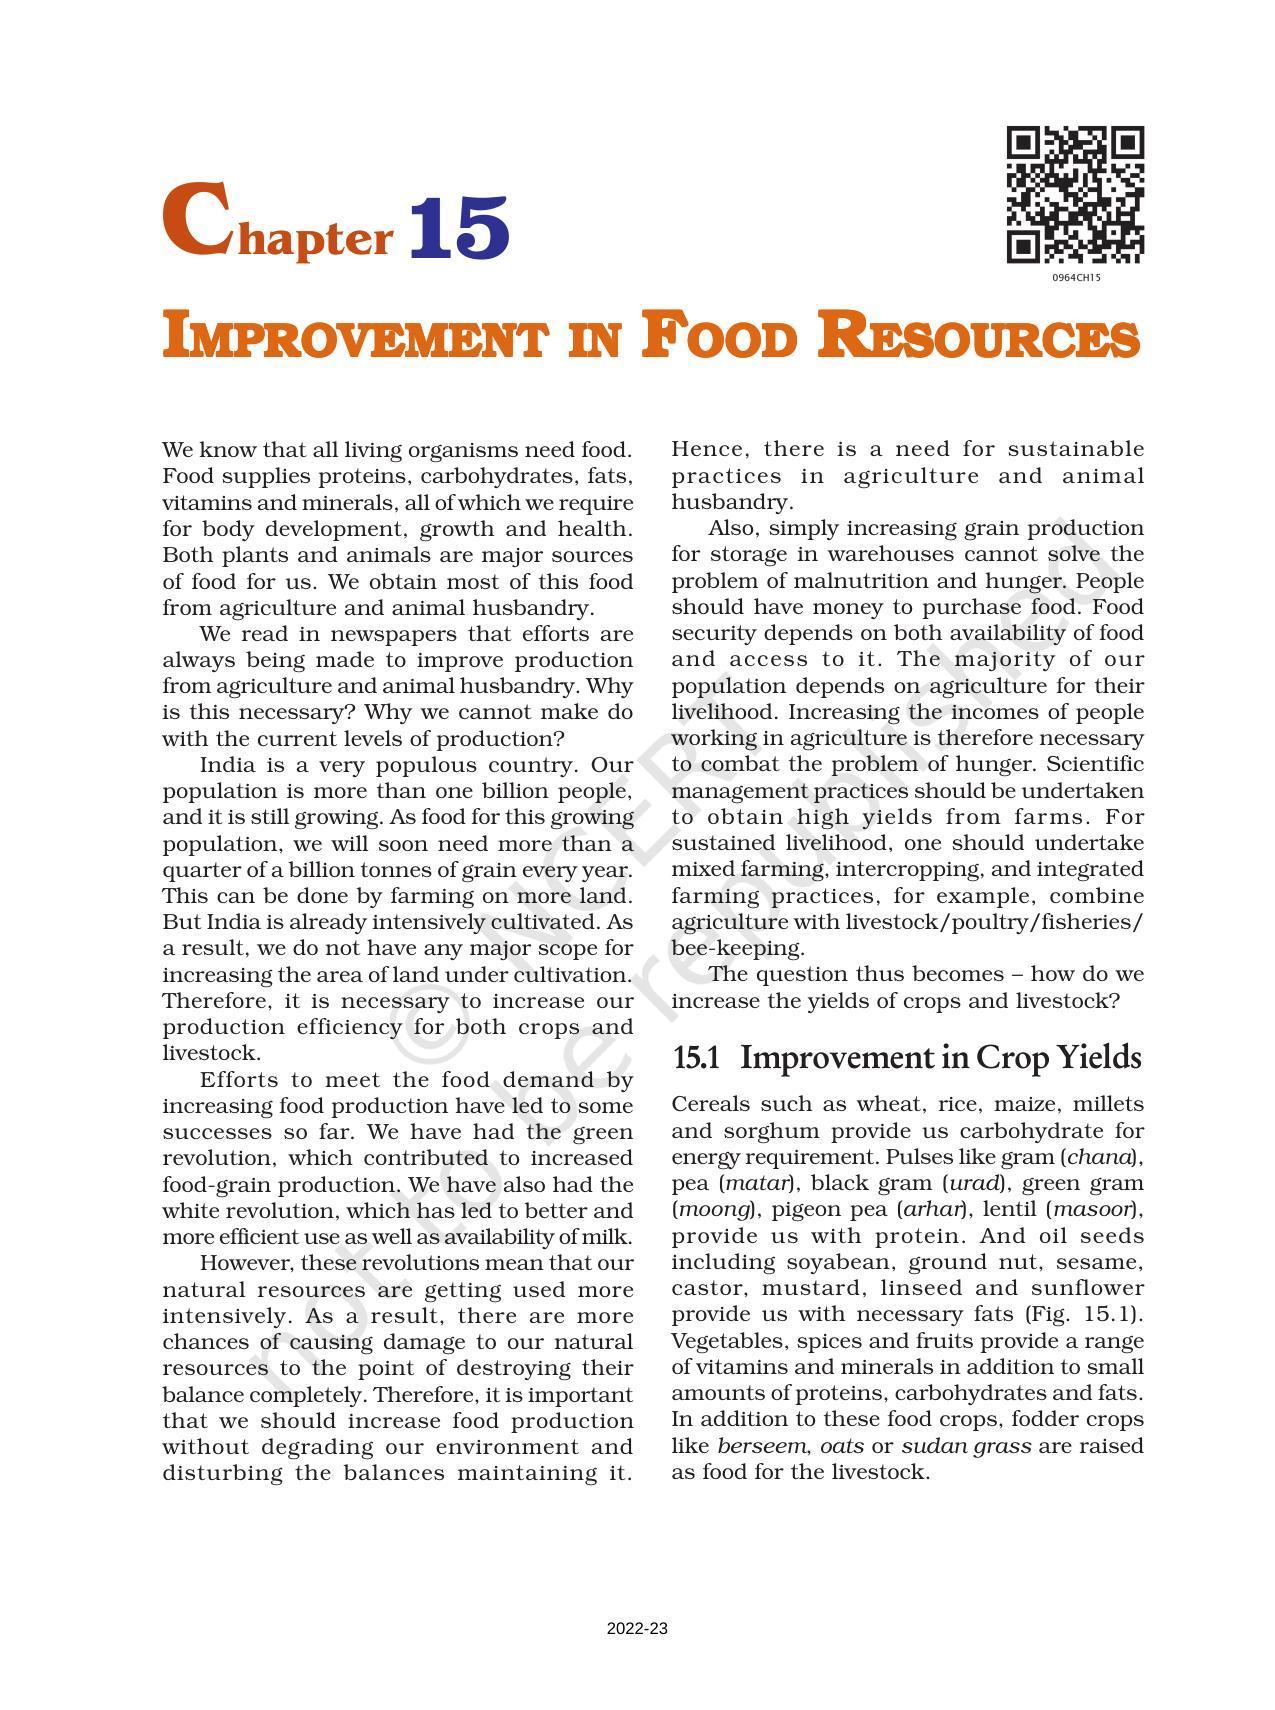 NCERT Book for Class 9 Science Chapter 15 Improvement in Food Resources - Page 1